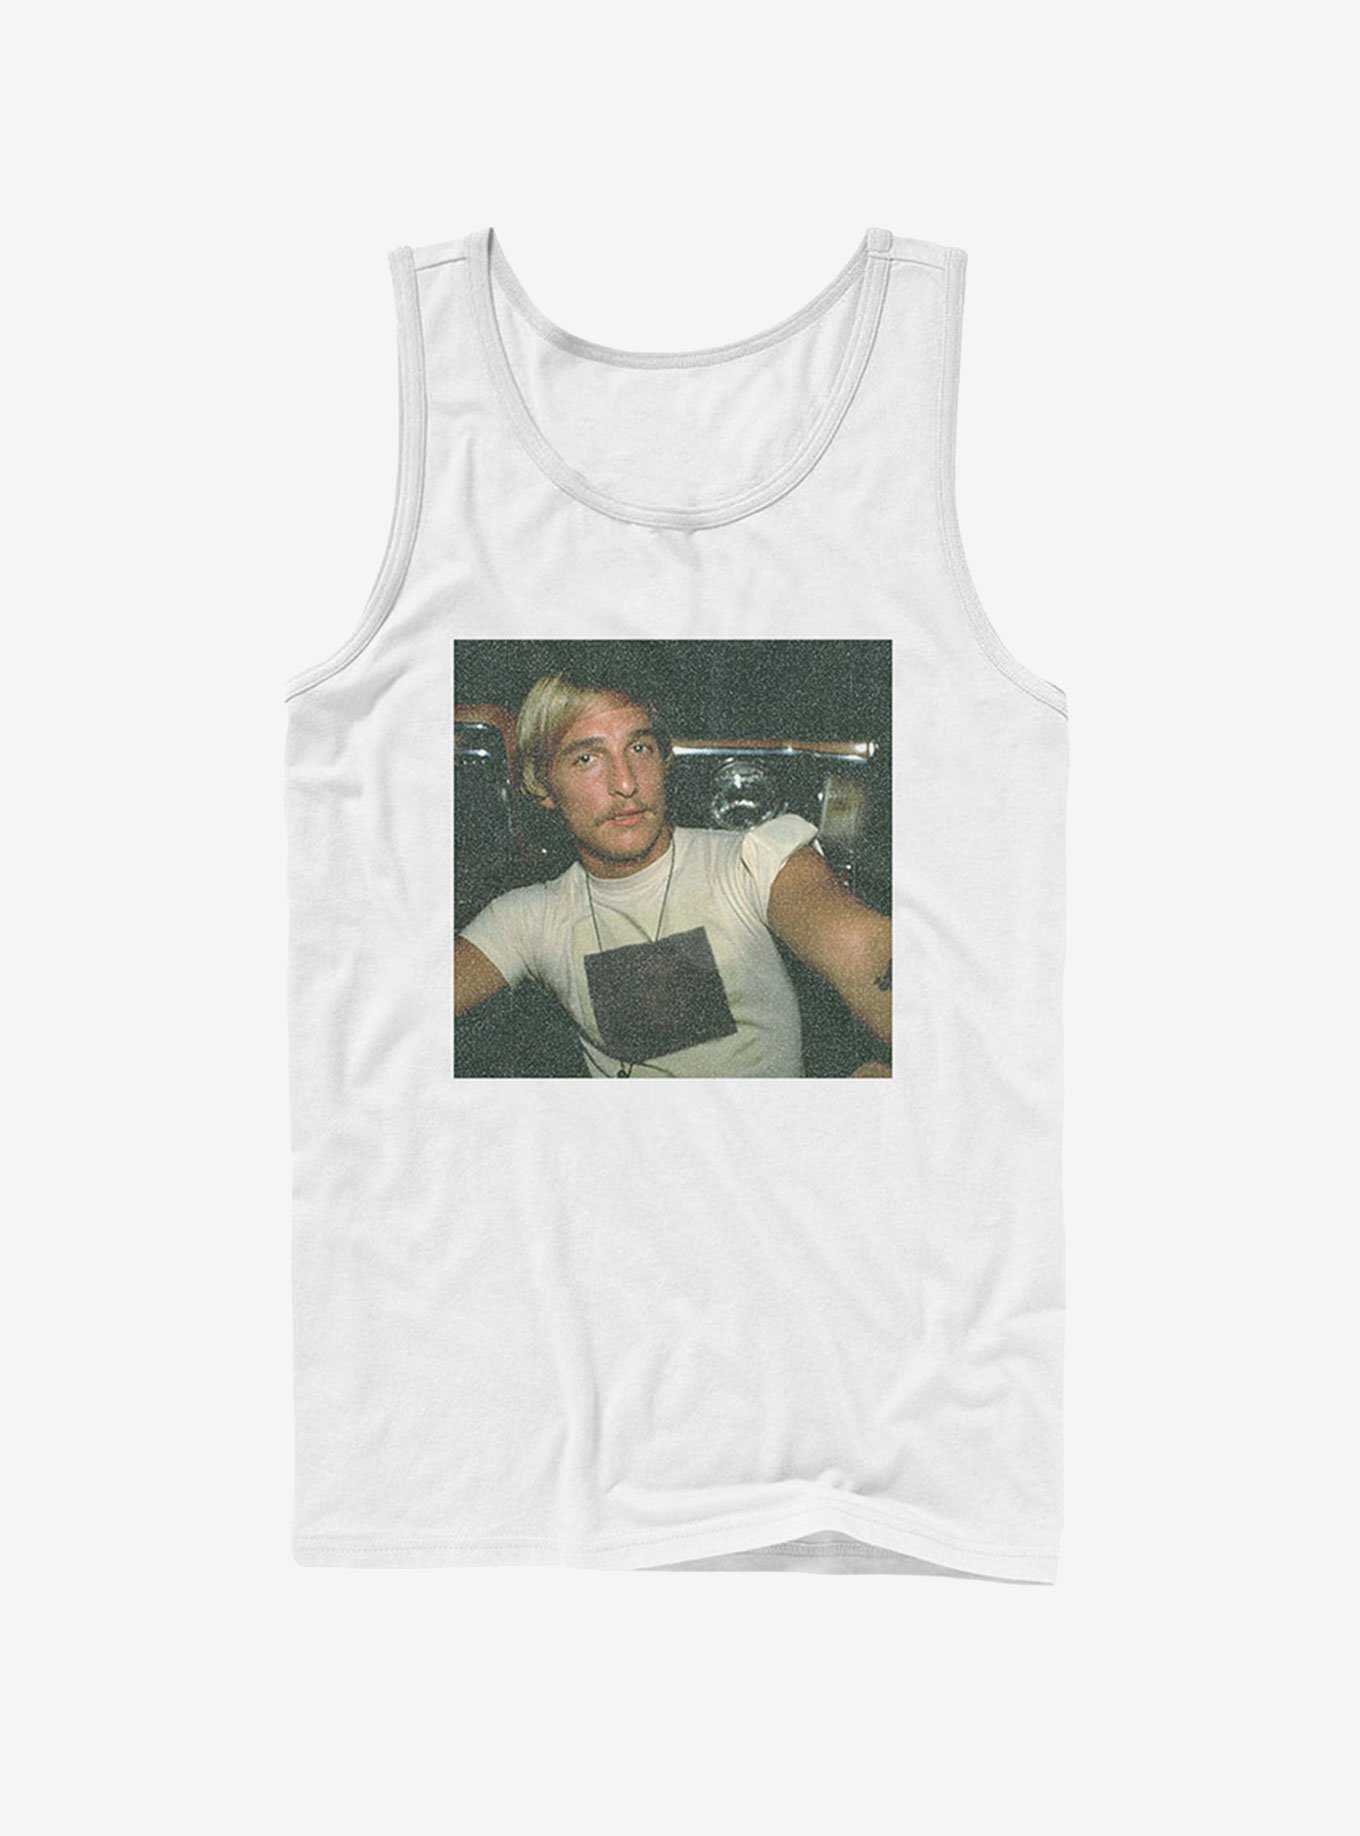 Dazed and Confused Ultimate Party Boy Tank Top, , hi-res